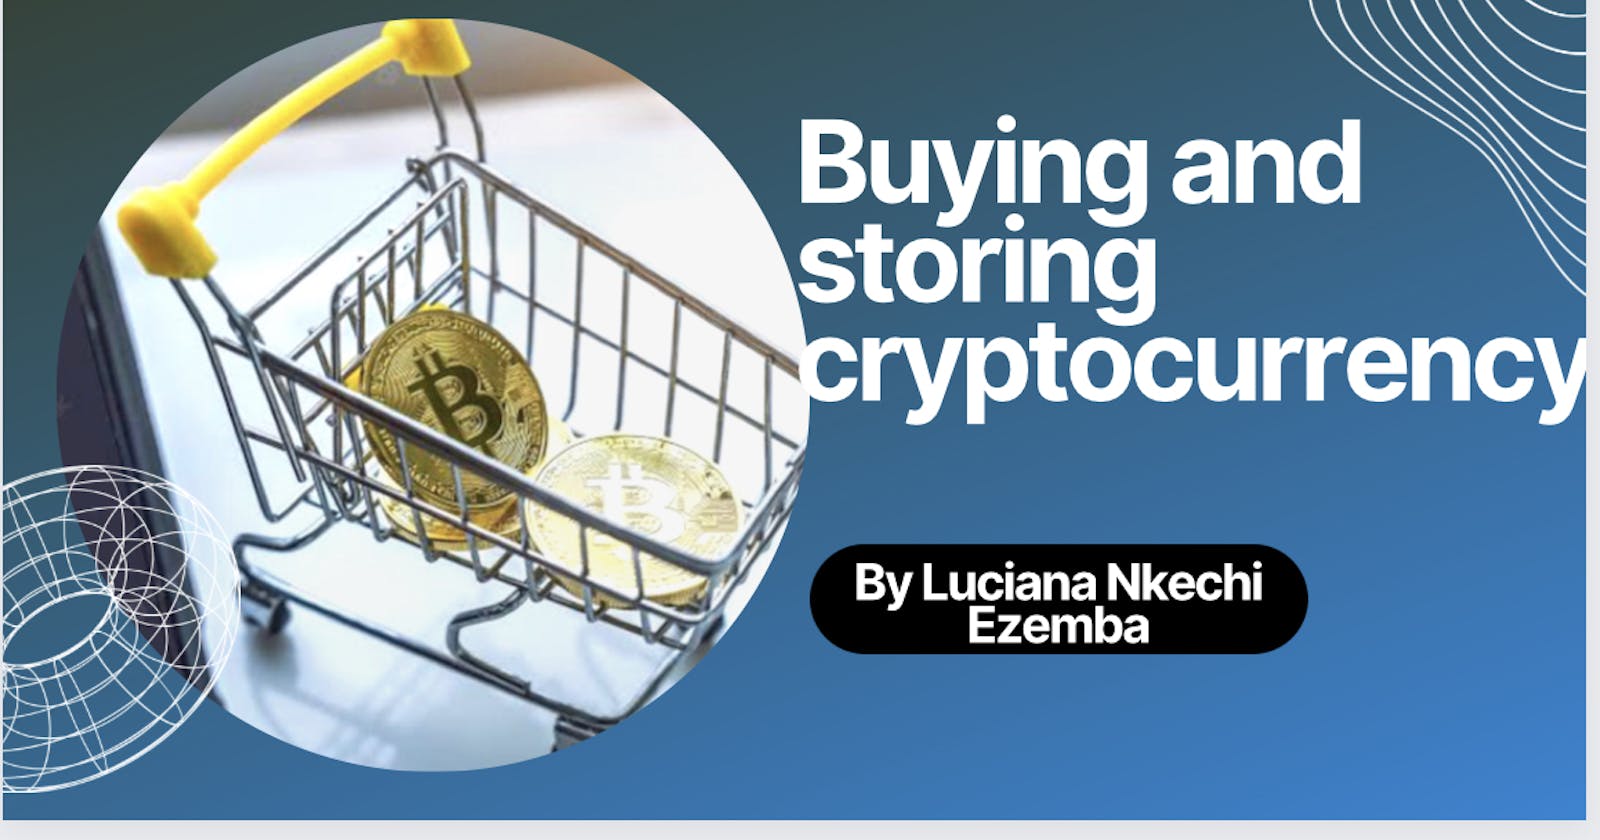 What you need to know about Buying and Storing Cryptocurrency.